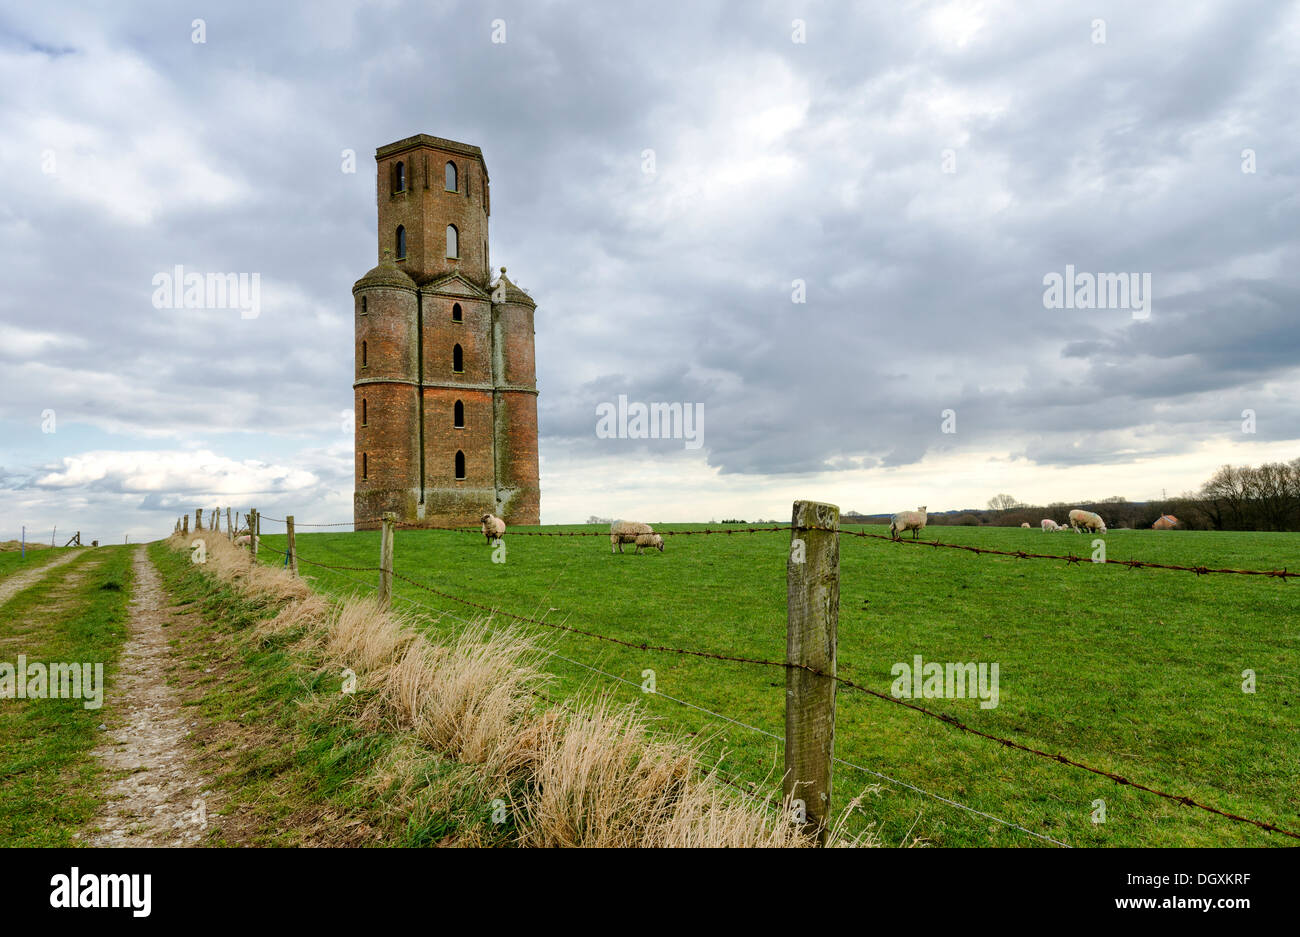 An old ruined tower in Horton, Dorset, originally built as a folly now used as a mobile phone mast Stock Photo